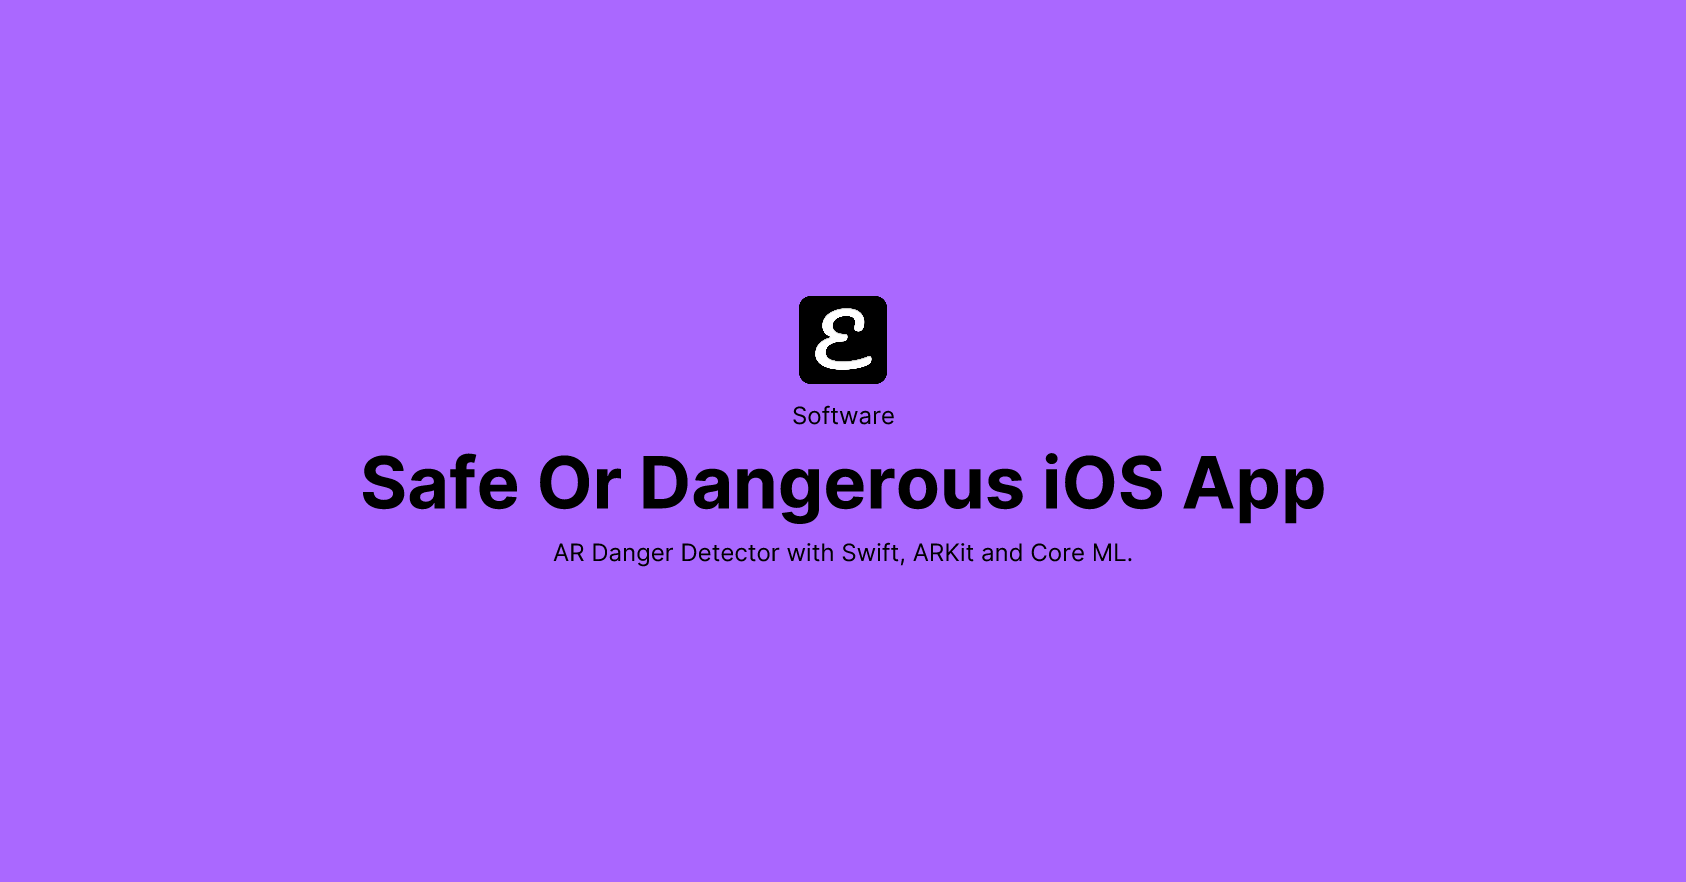 Safe Or Dangerous iOS App by Eric David Smith